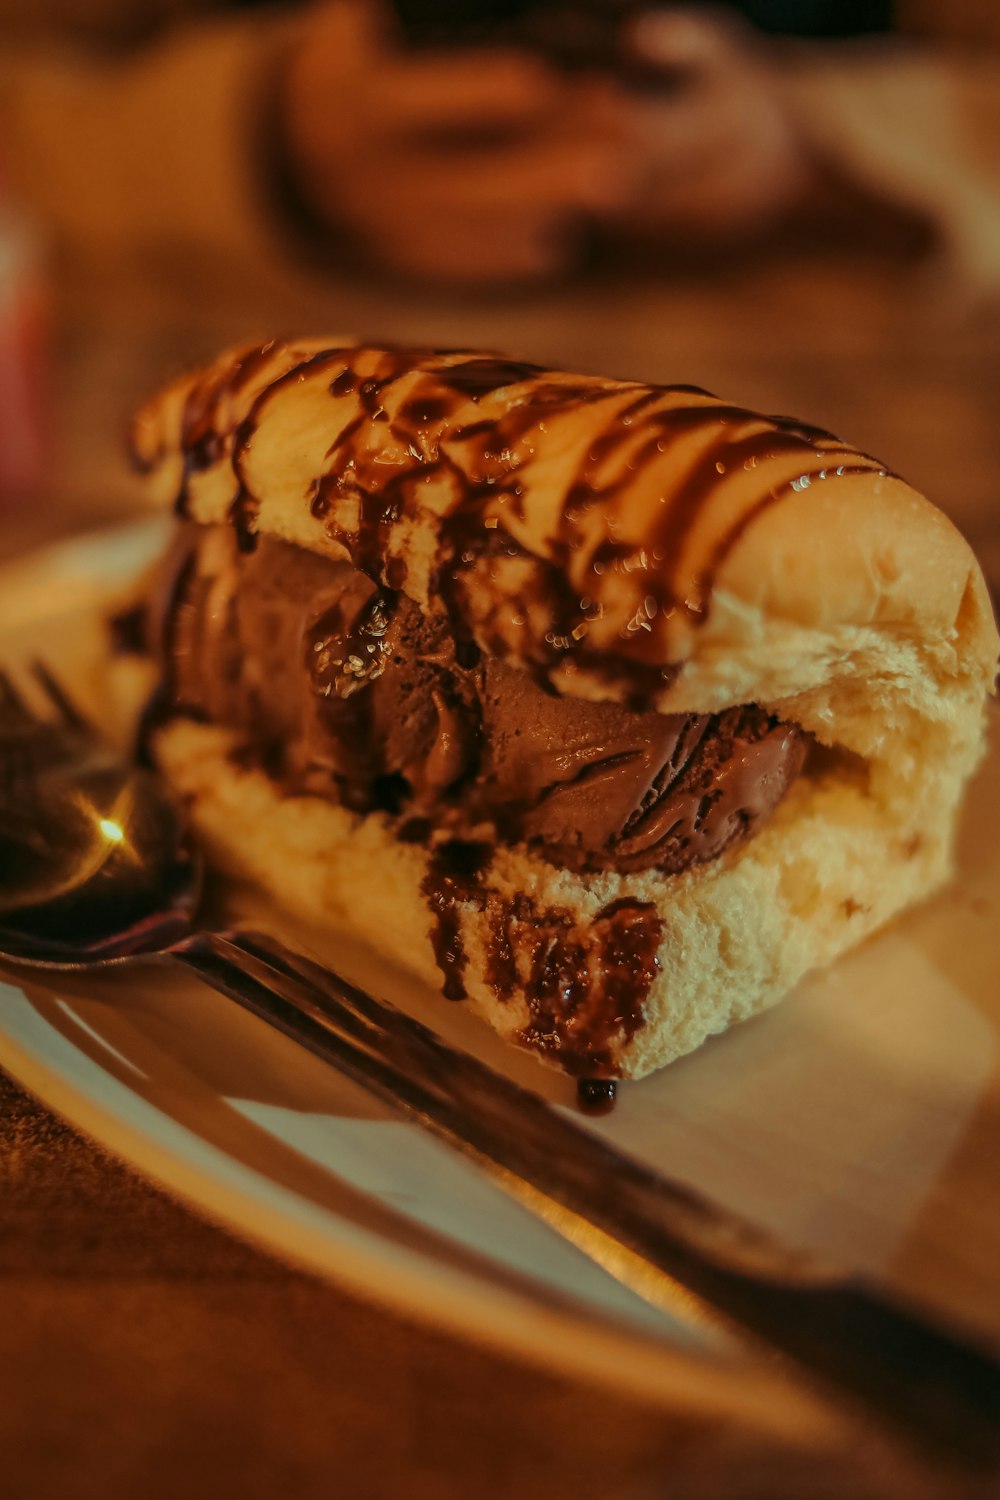 a chocolate ice cream sandwich on a plate with a spoon